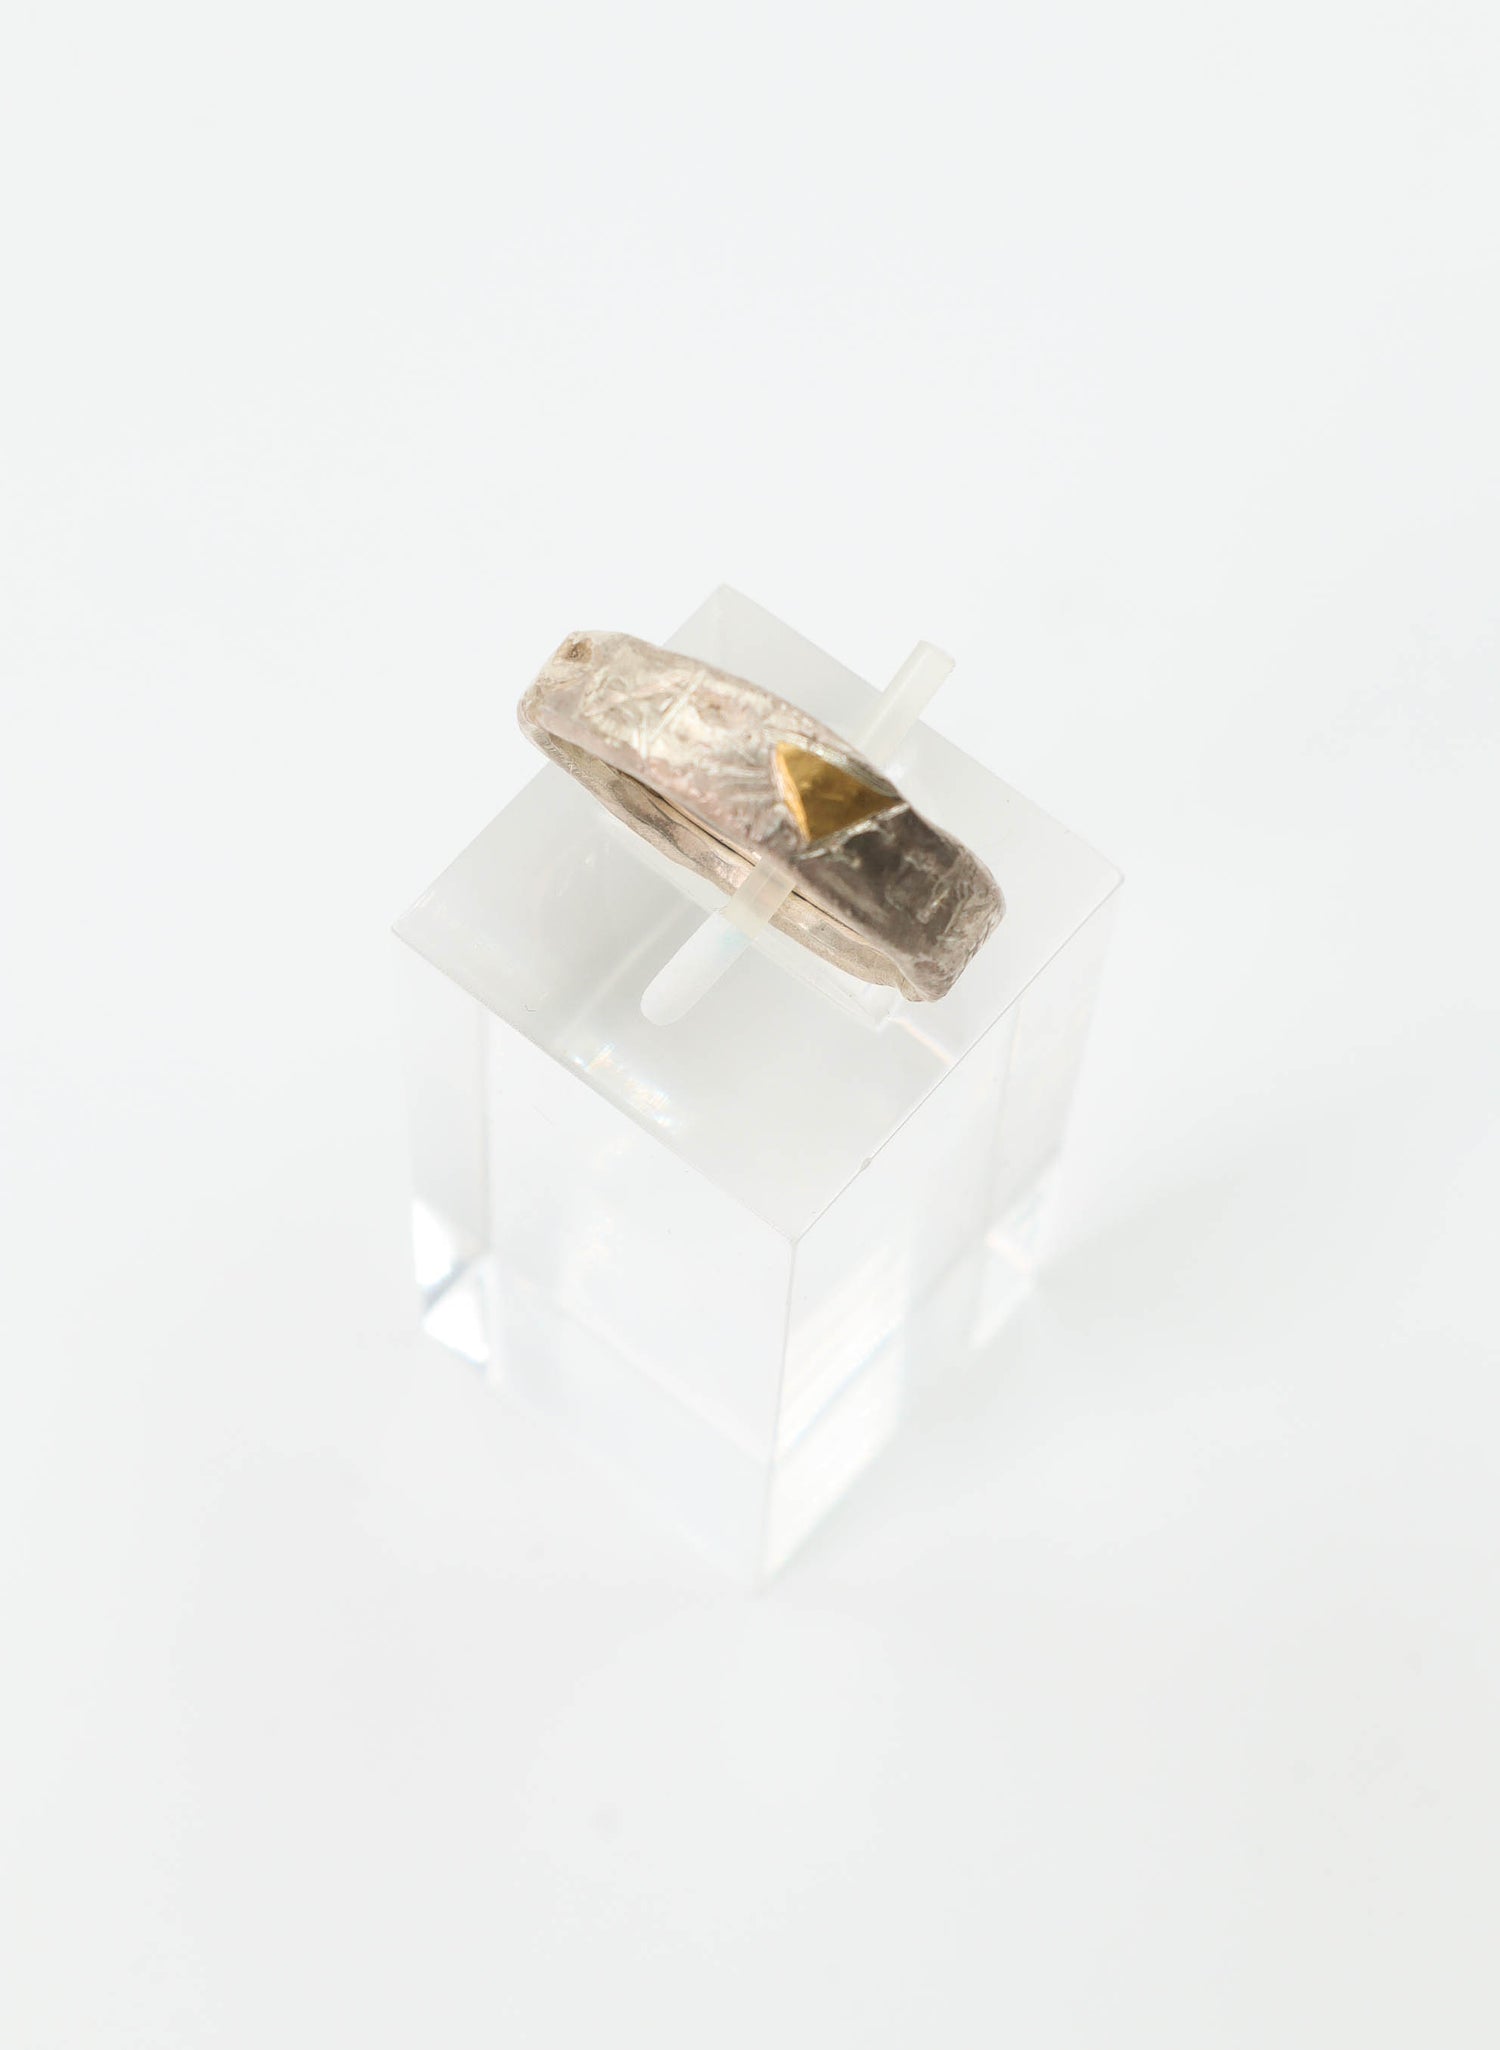 Voyager Ring - Silver + 24ct Gold